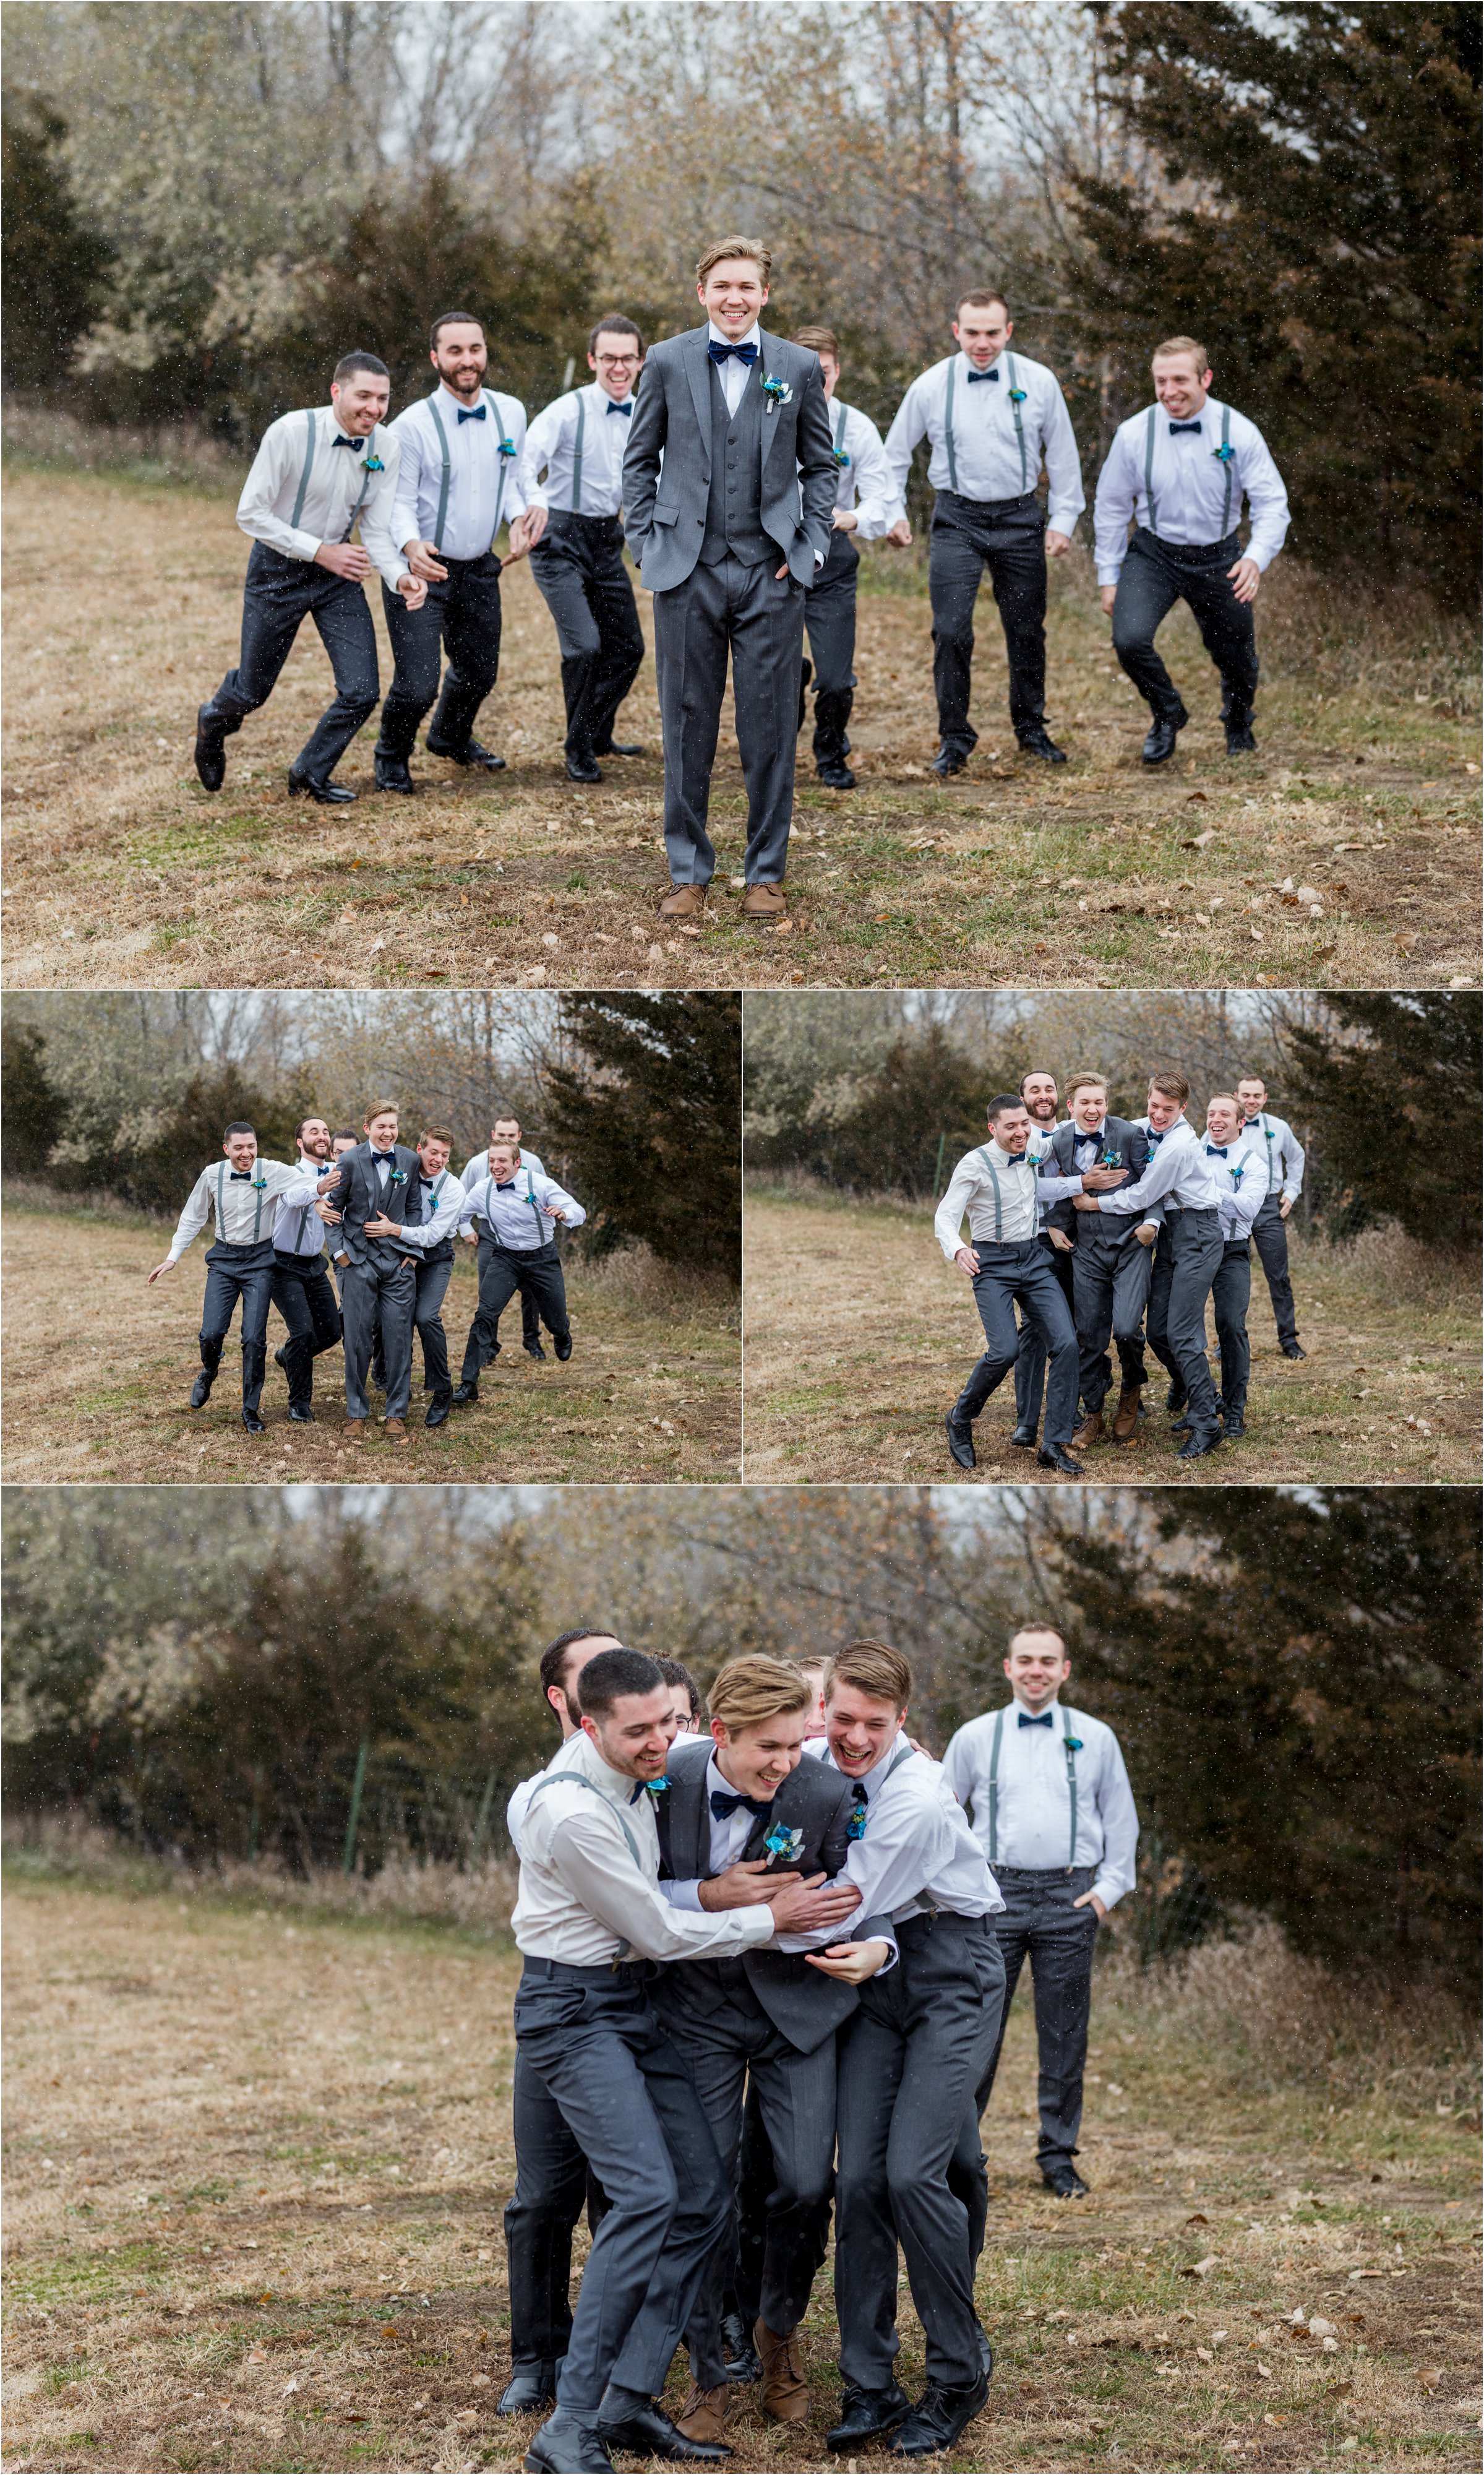 groom and groomsmen pose for portraits outside in front of evergreen trees with snow starting to fall